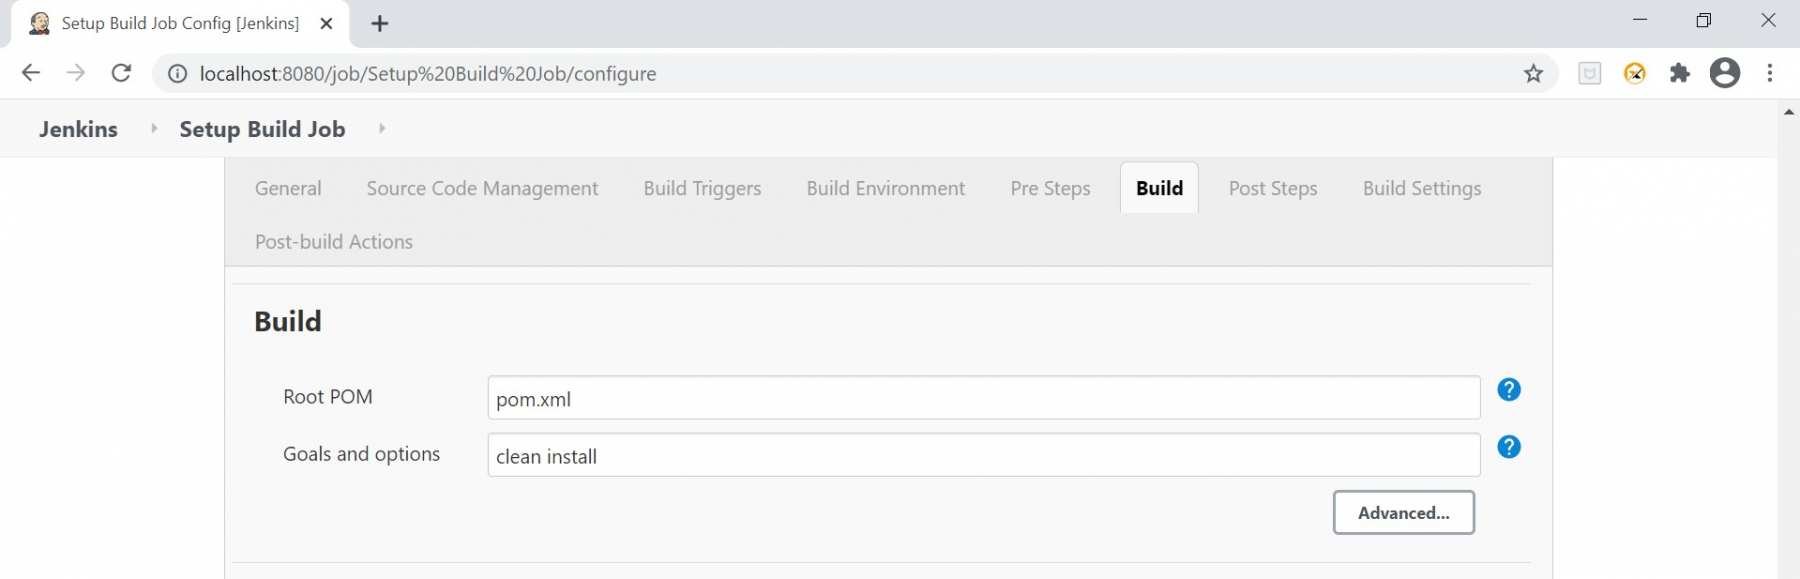 build section in Jenkins for Maven project